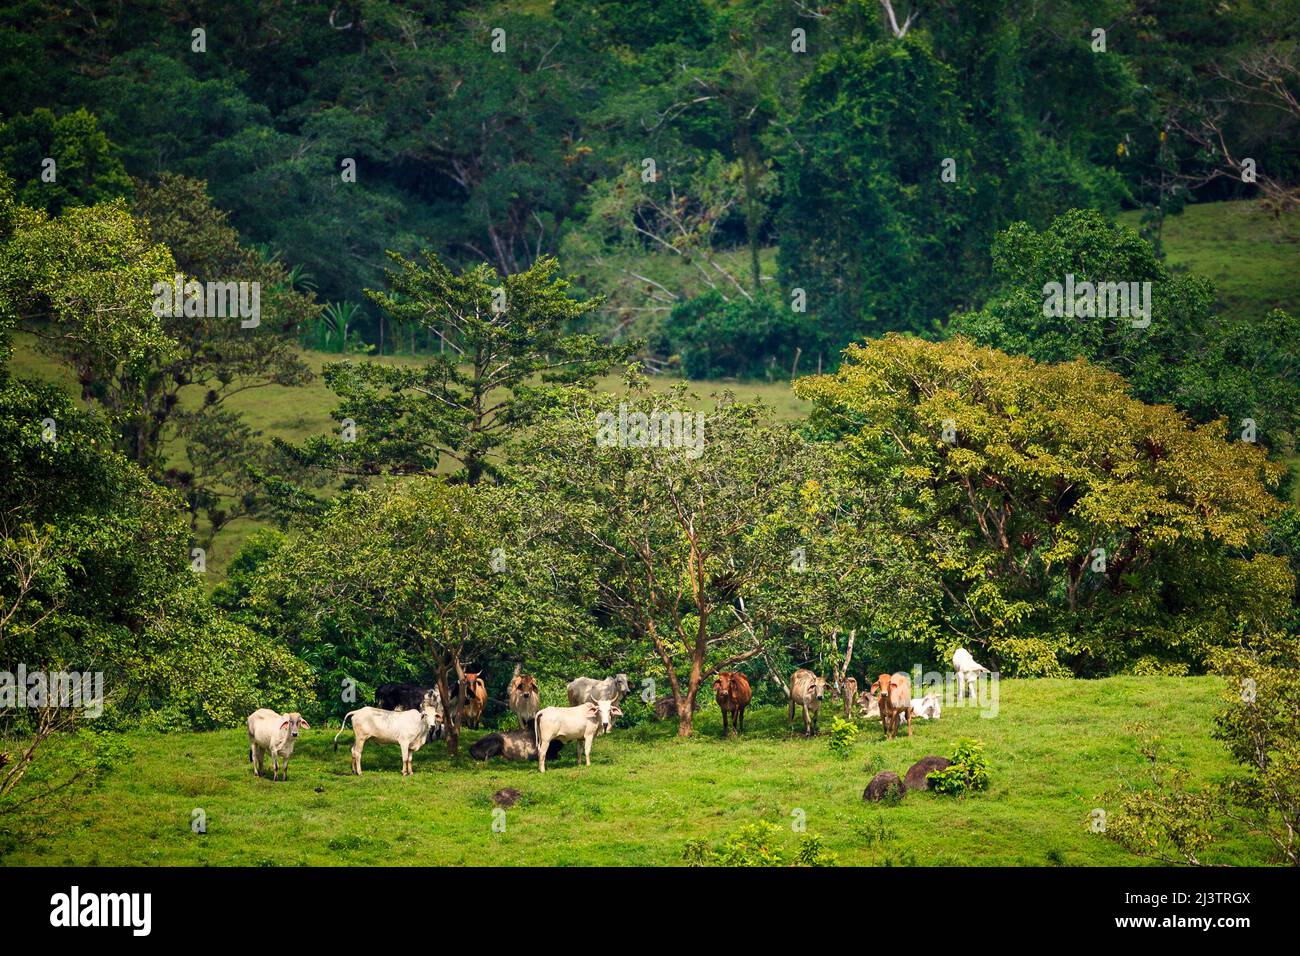 A herd of livestock in a lush and green landscape near Coclecito, Cocle province, Republic of Panama, Central America. Stock Photo